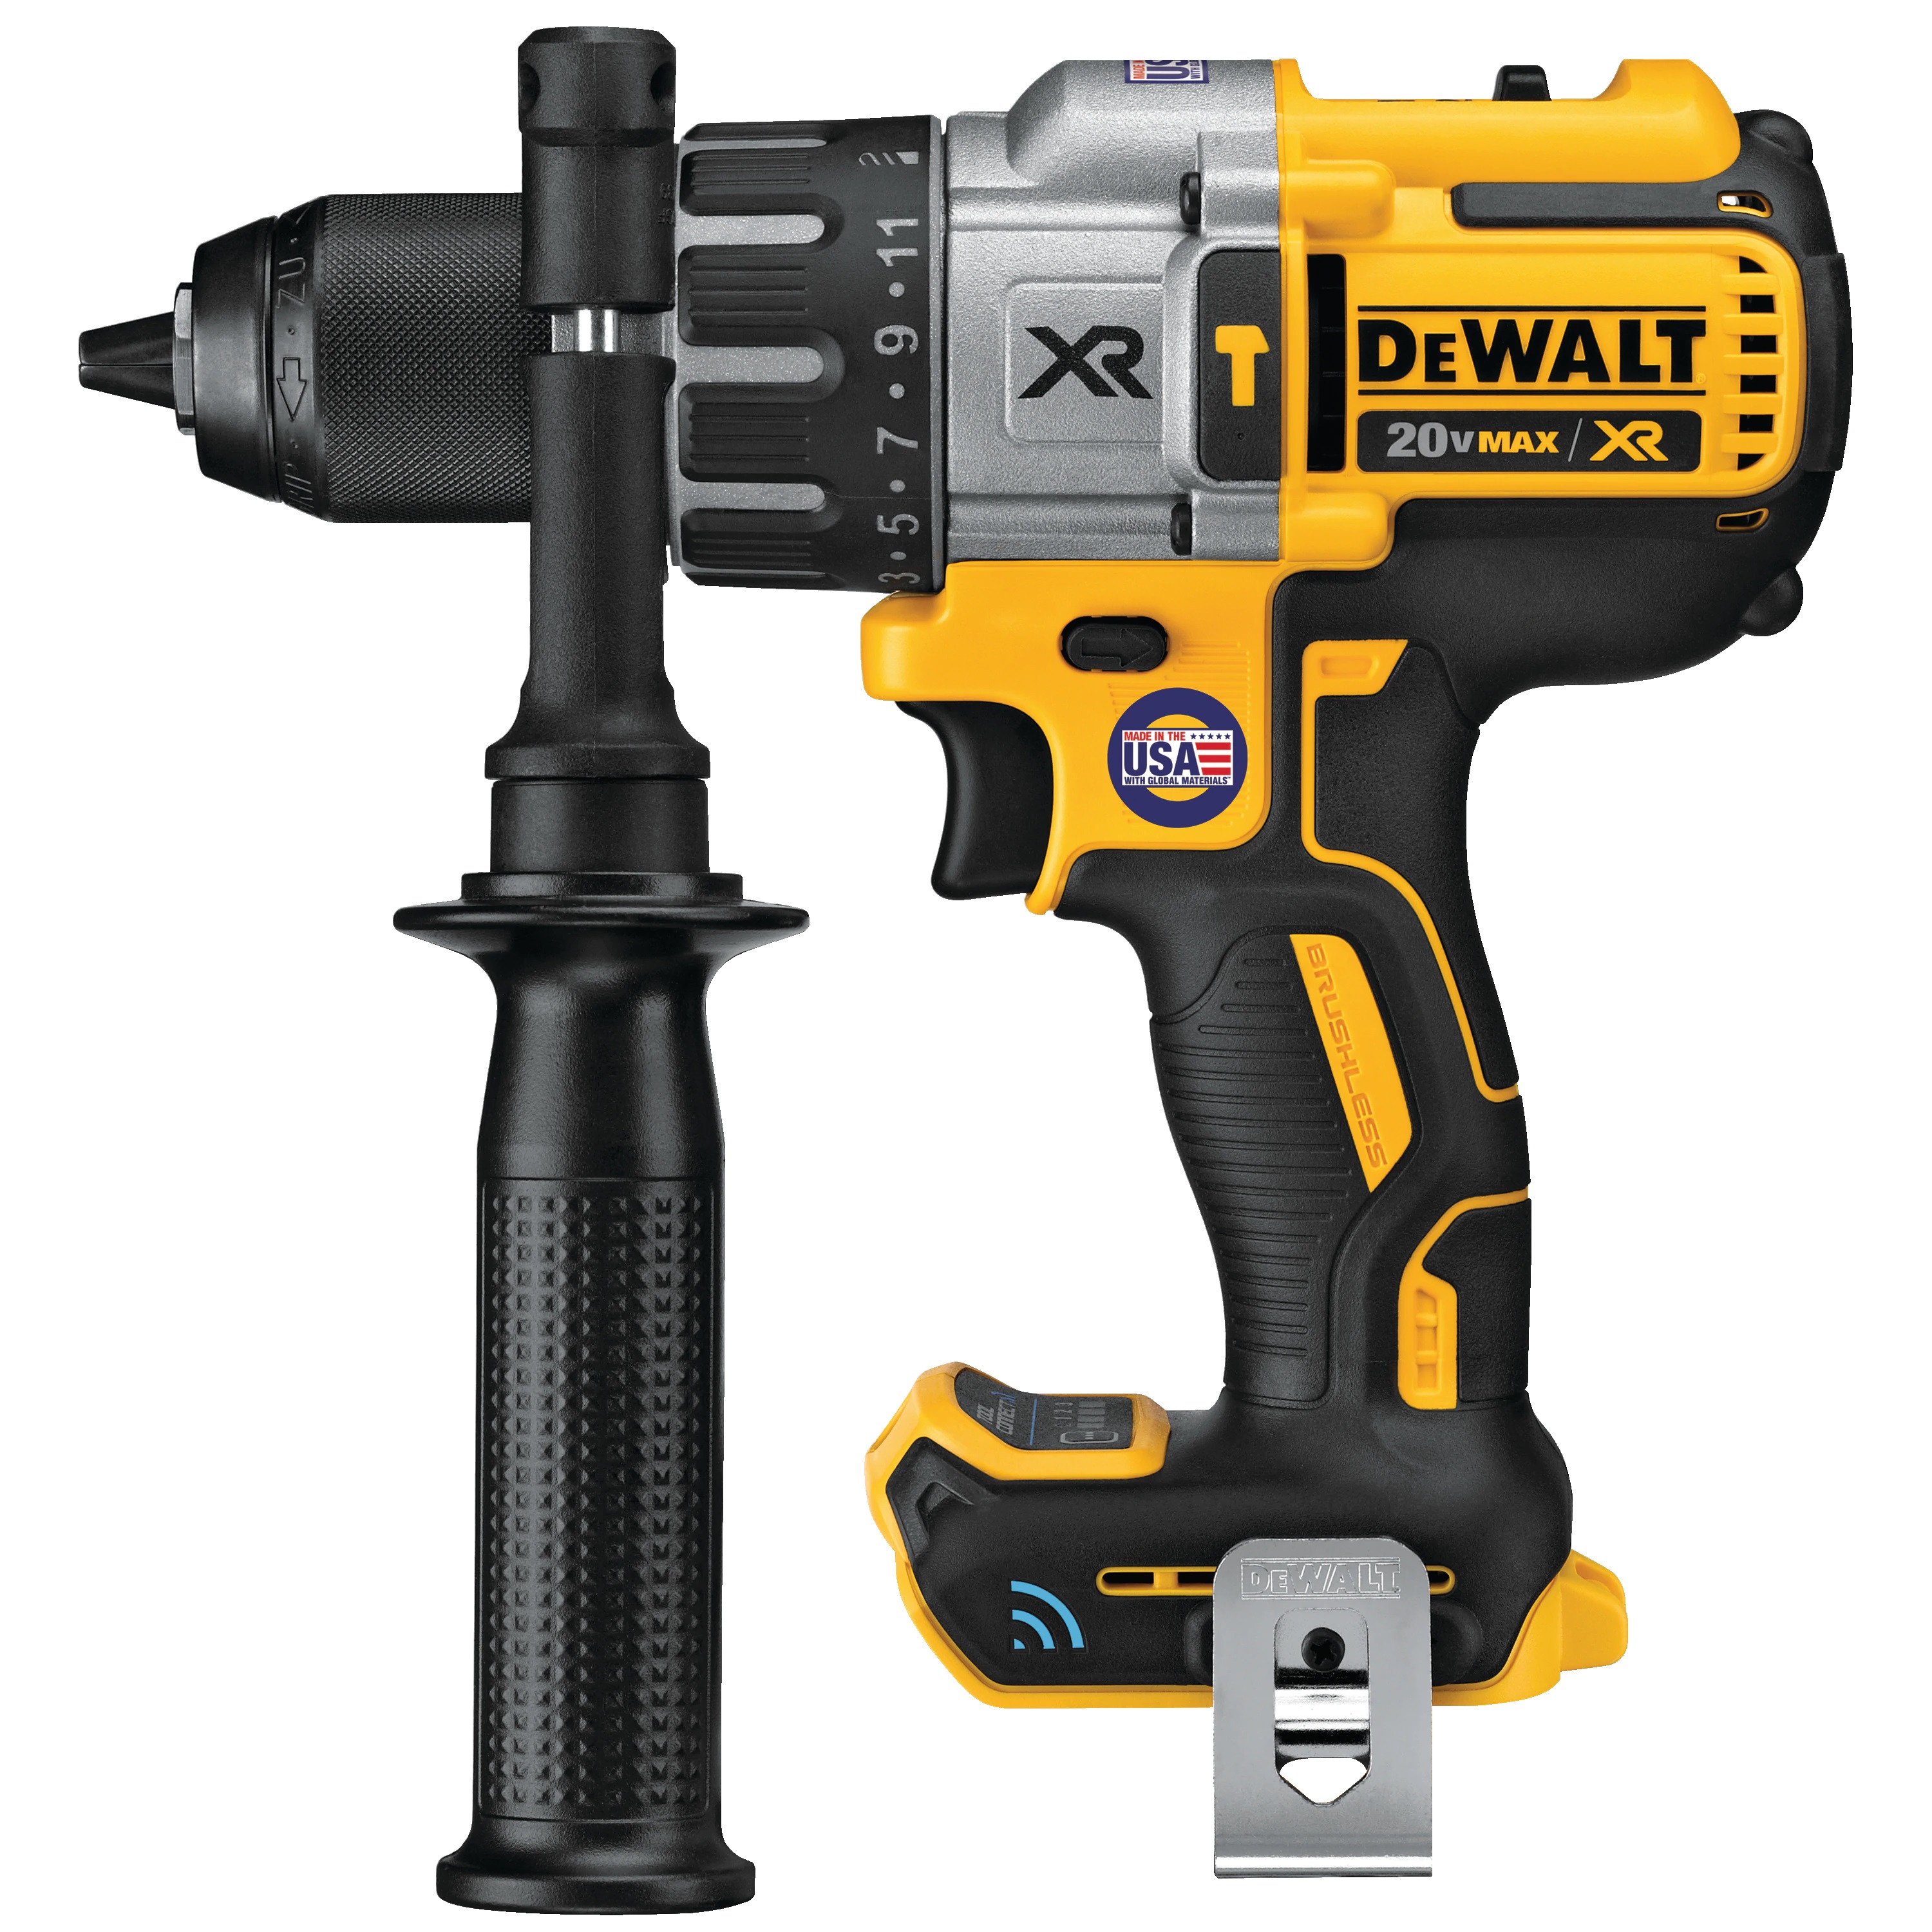 DeWalt 20V MAX* 1/2 in XR® Brushless Cordless Hammer Drill/Driver (Tool Only)